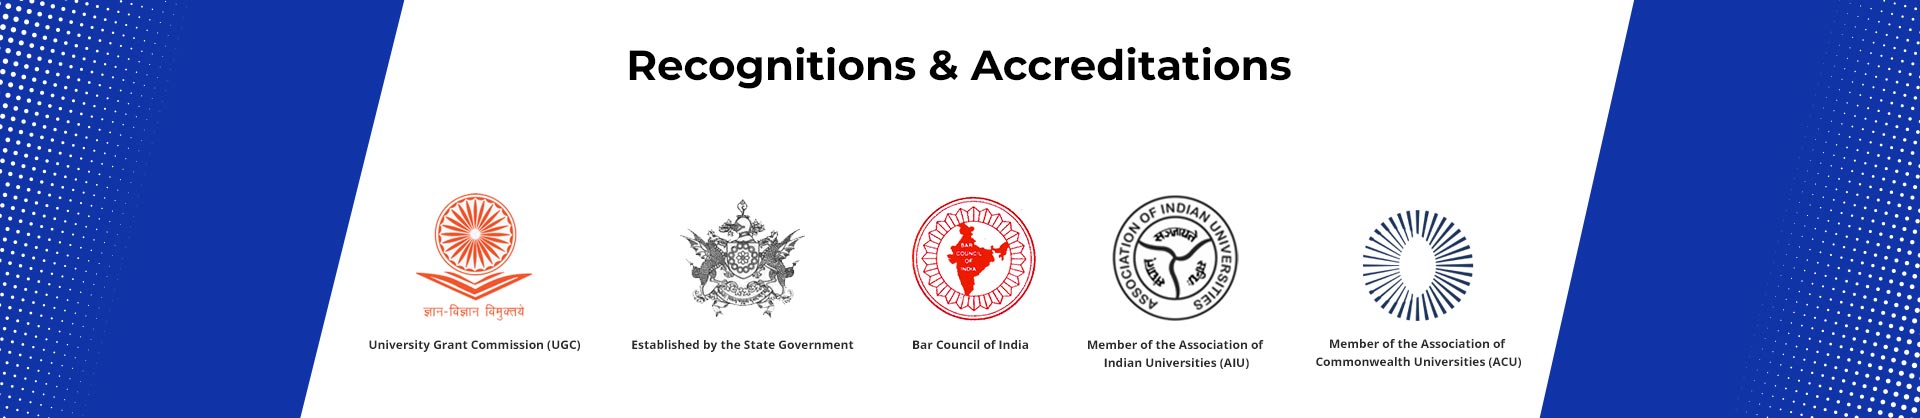 Recognitions Accreditations icfai sikkim